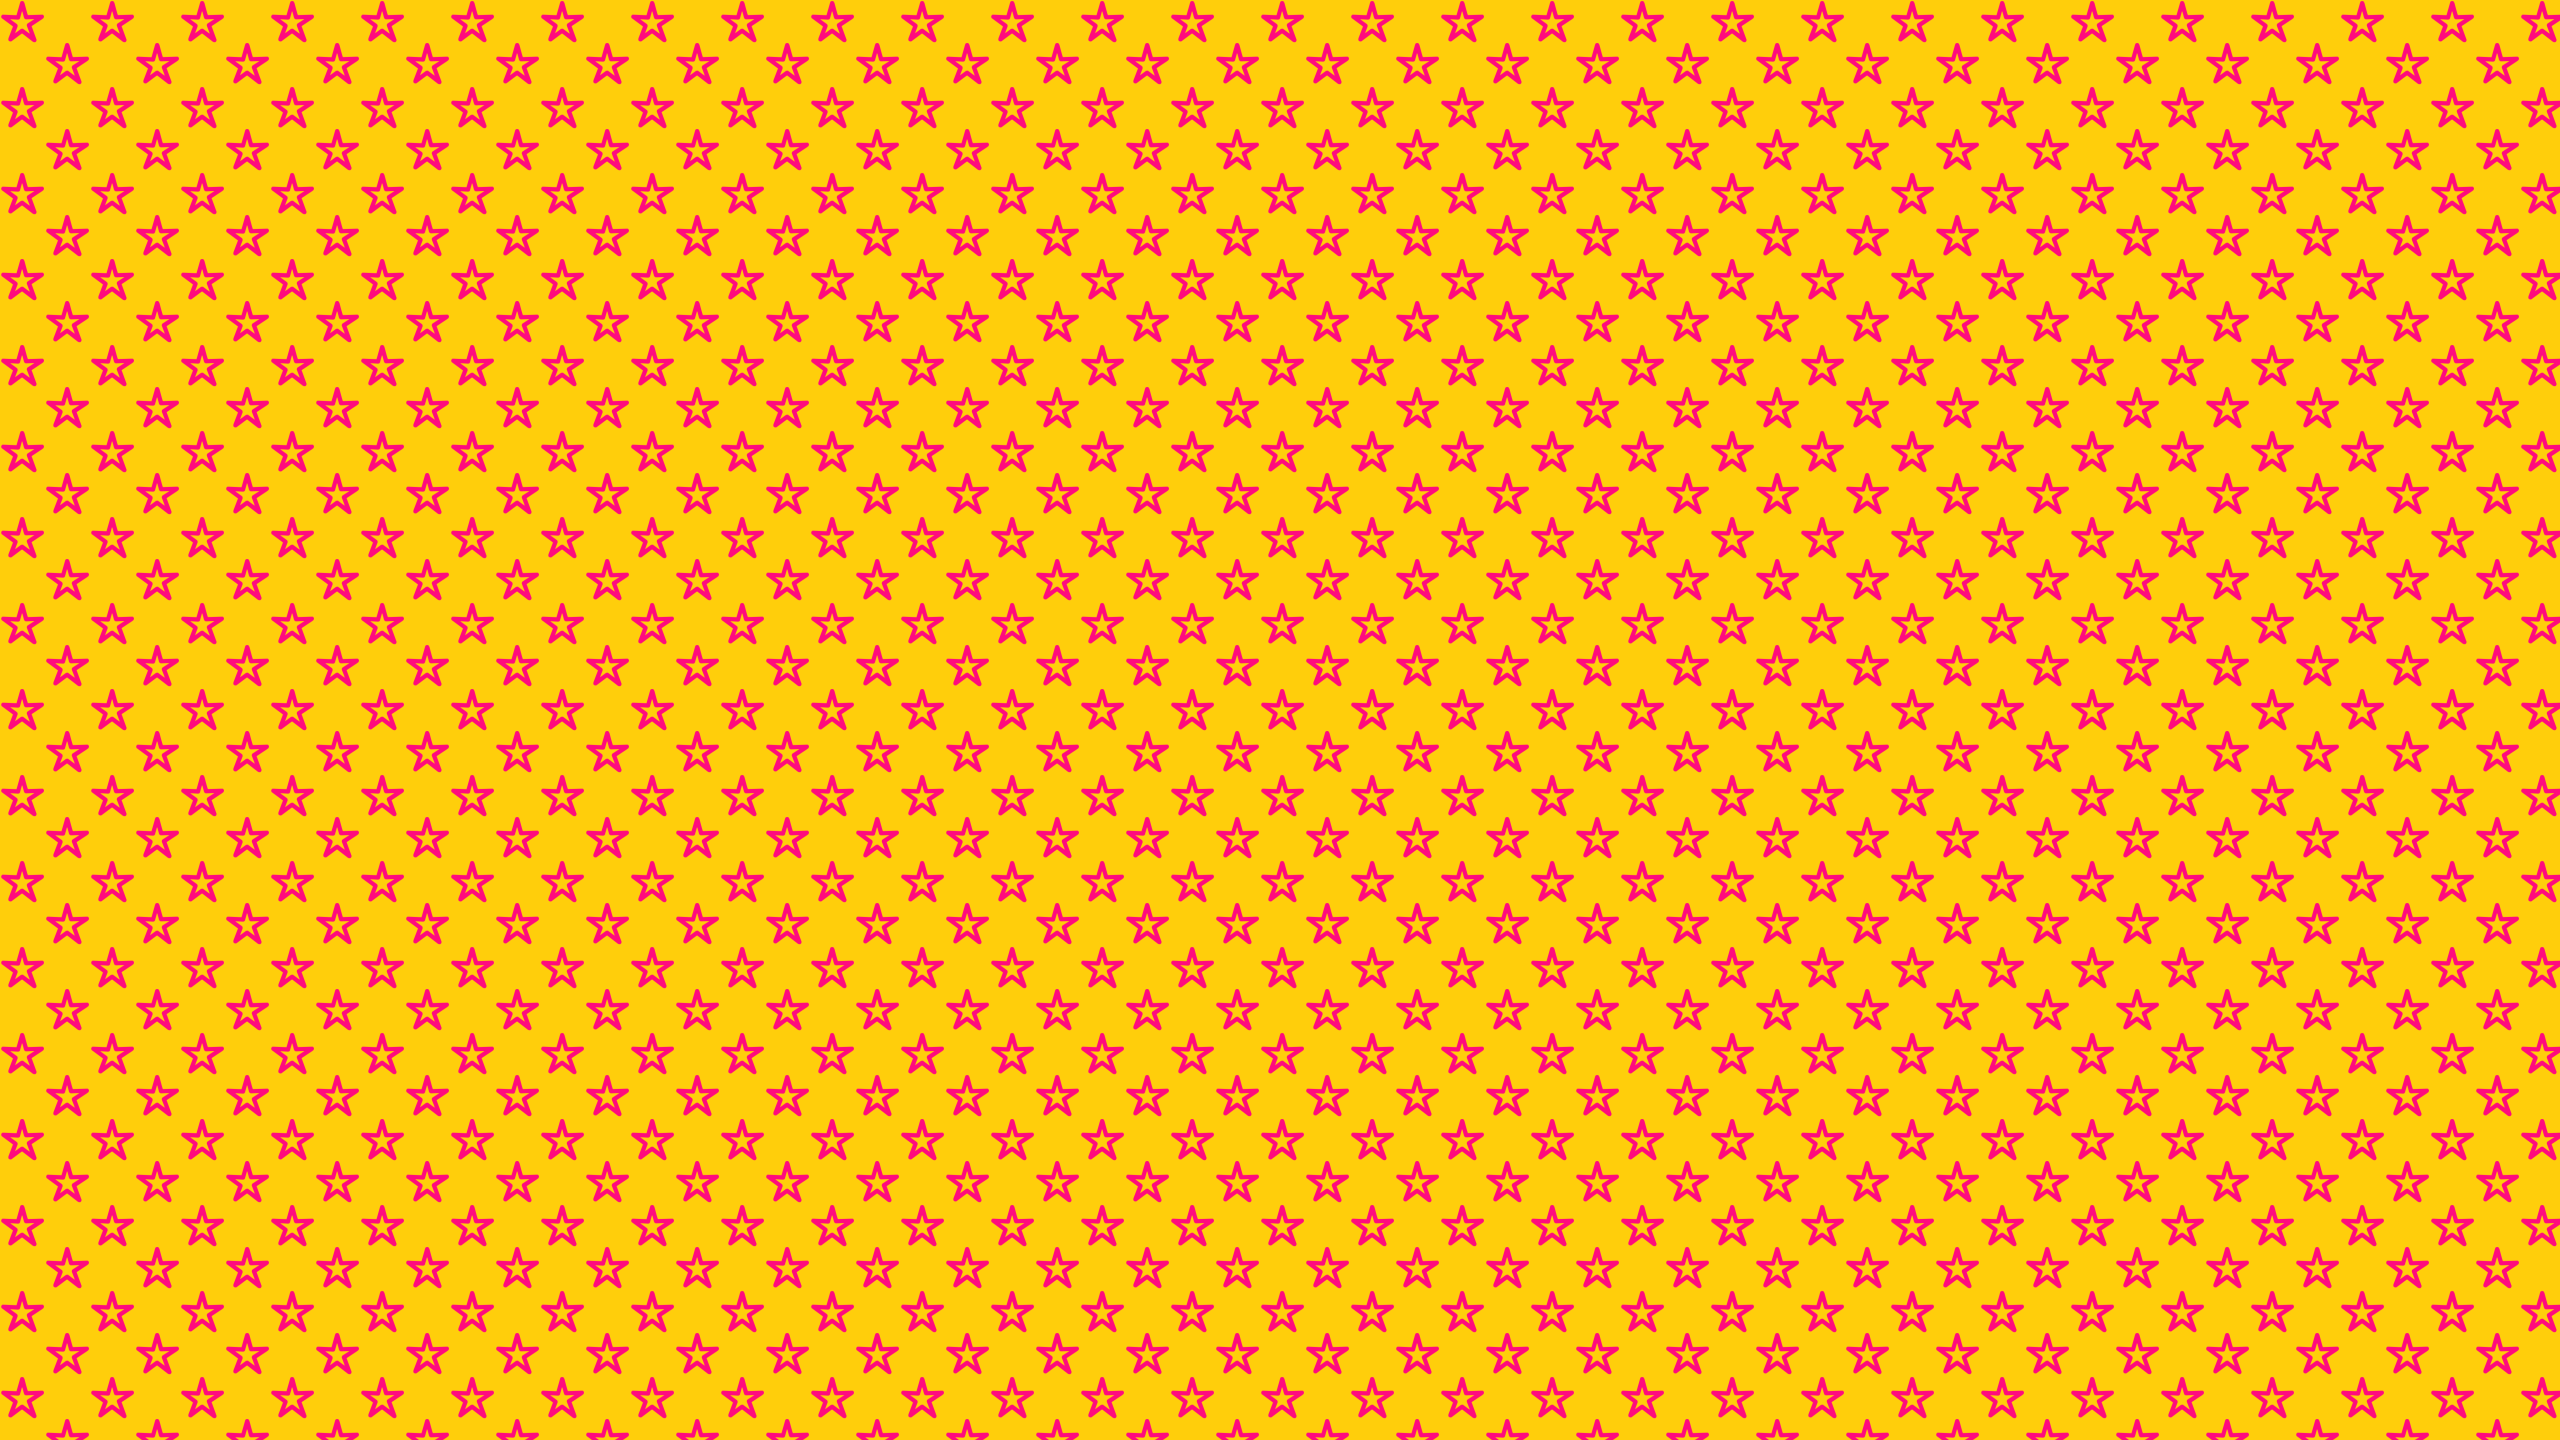 Yellow and Red Star Wallpaper